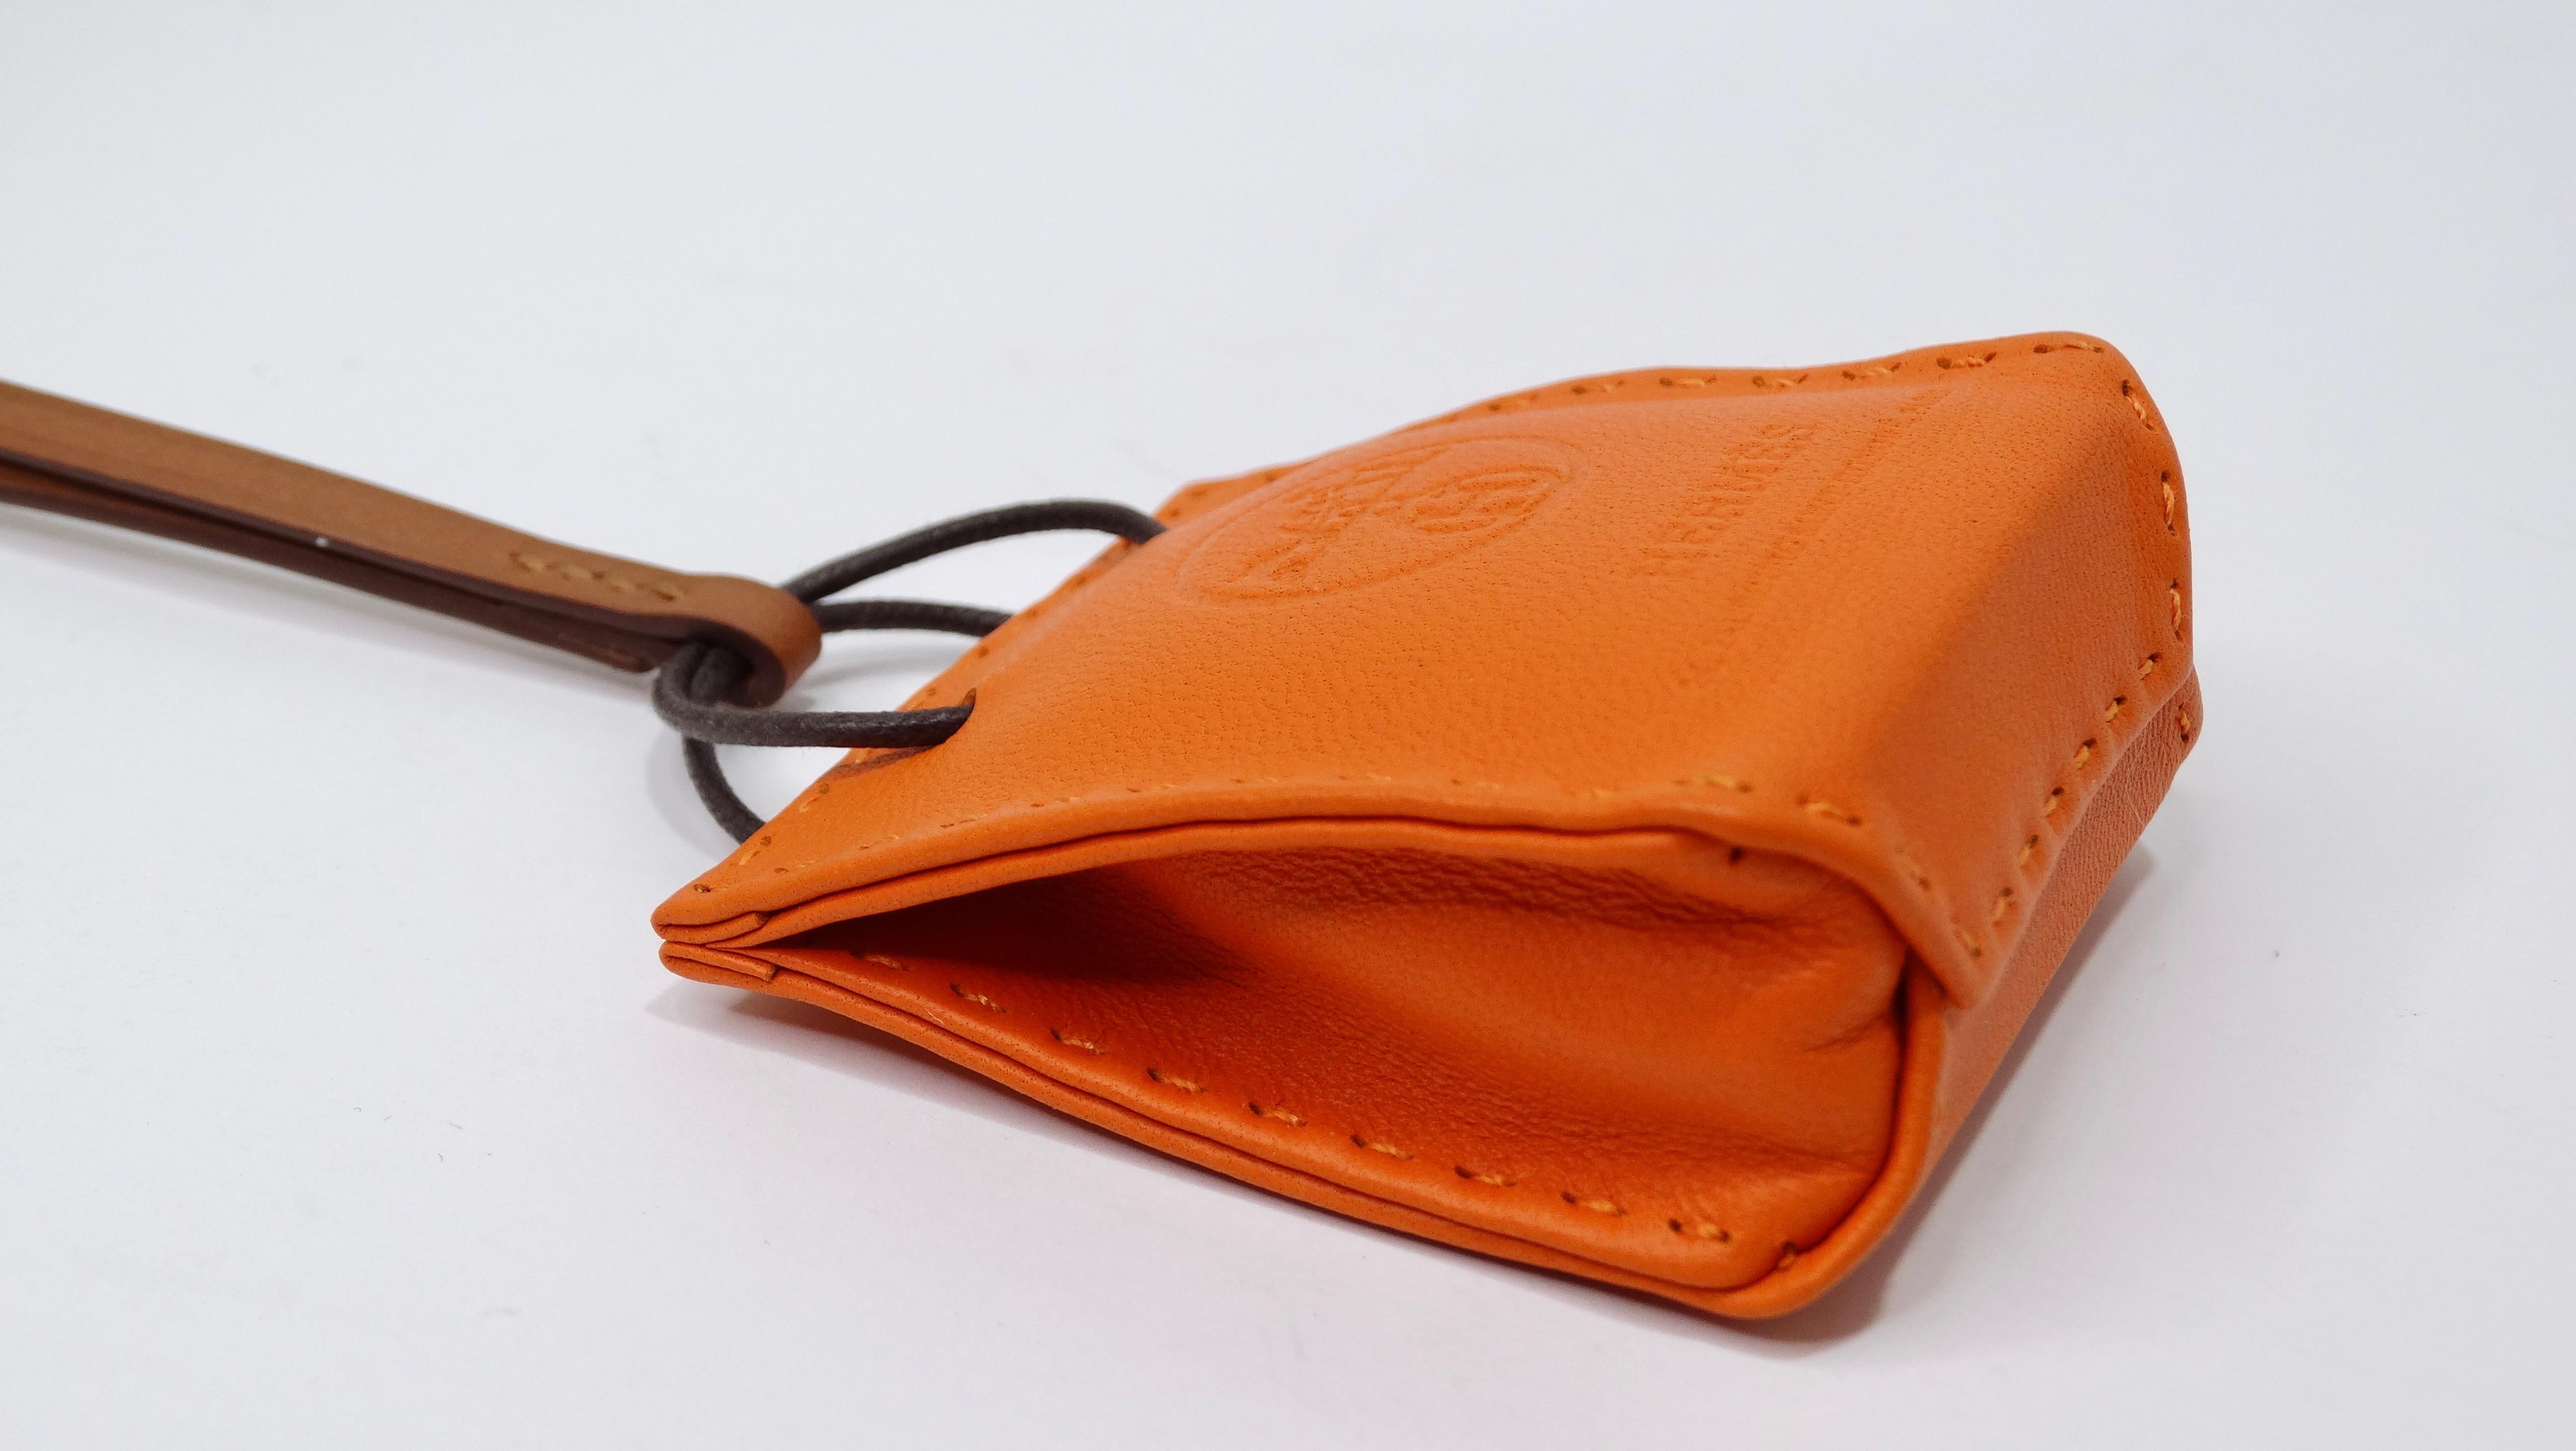 Hermes Orange Shopping Bag Charm In Excellent Condition For Sale In Scottsdale, AZ